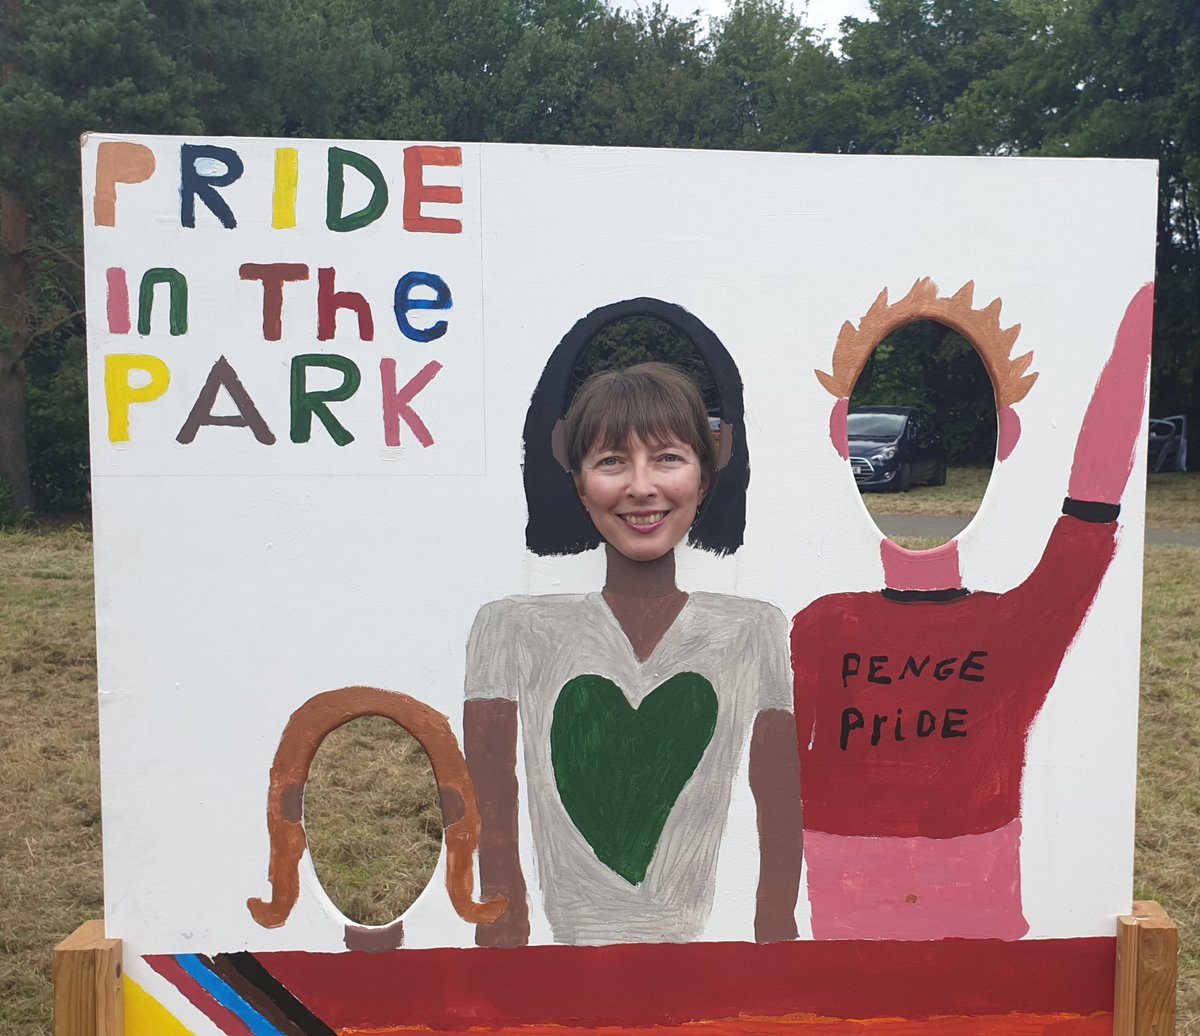 Having a great time at Penge Pride in Cator Park! #LGBTQ dating and relationship advice always available #pengepride #pengefest @PengeFestival @thepengetourist